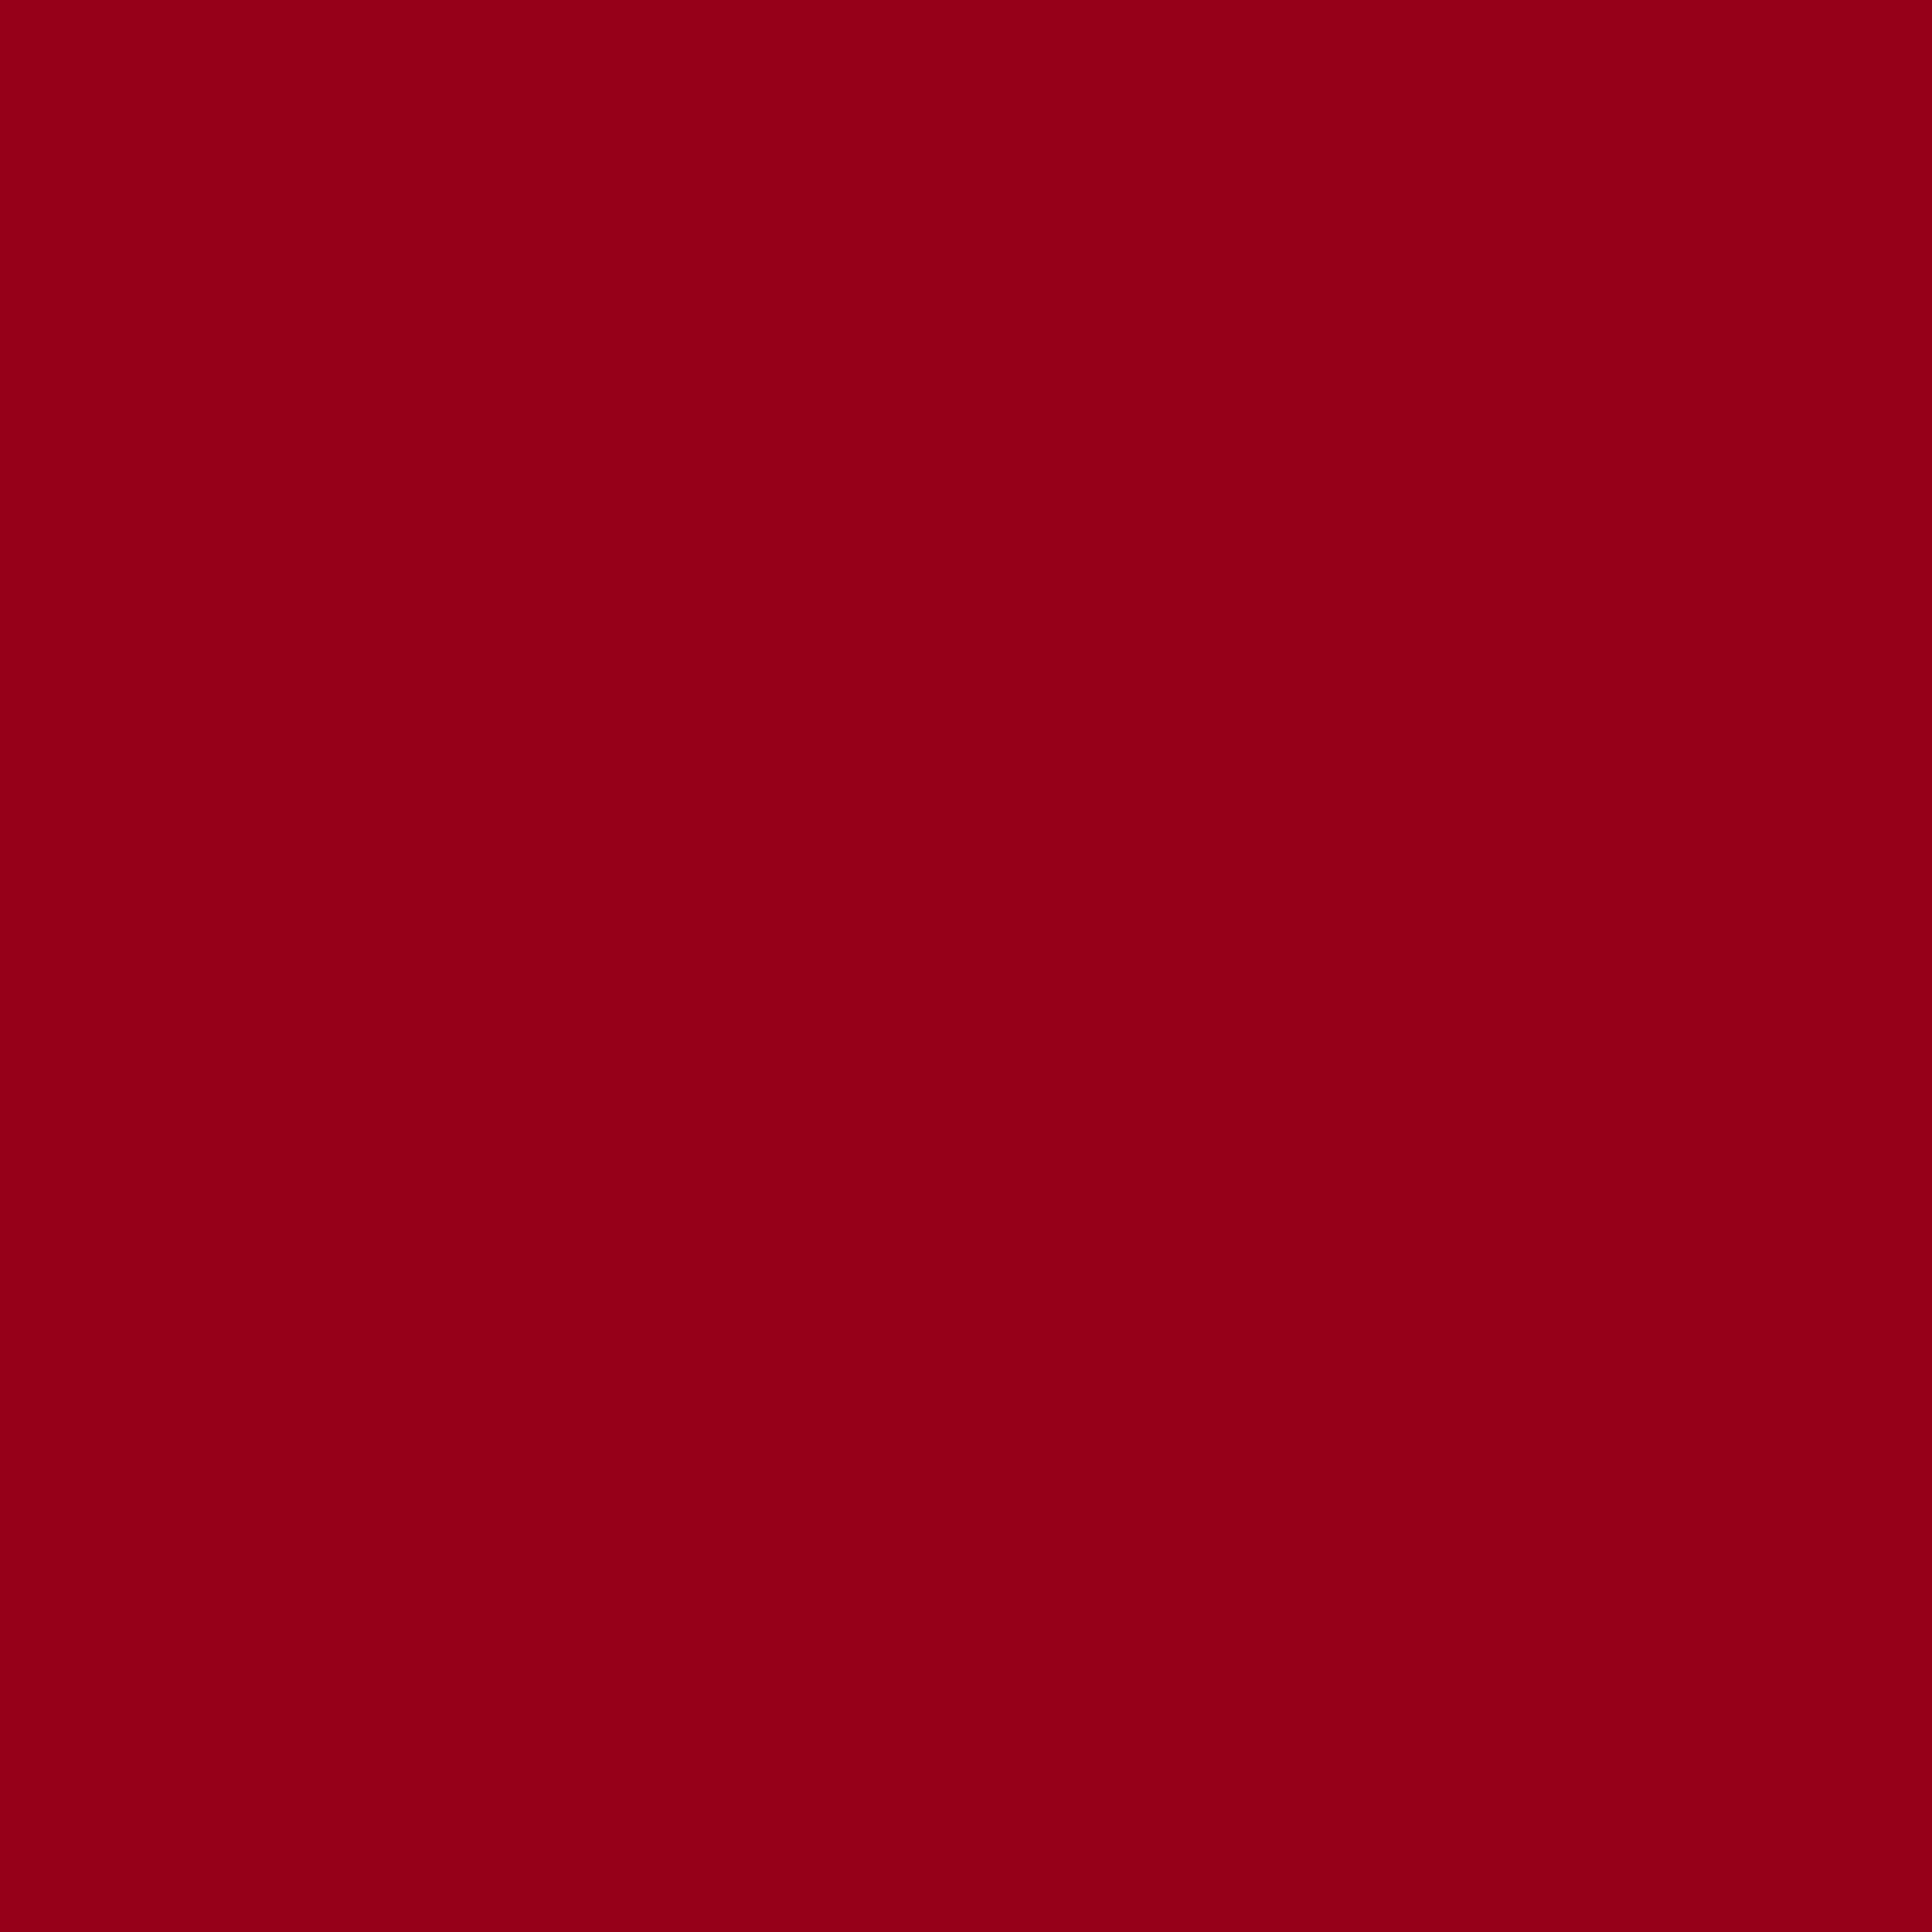 2732x2732 Carmine Solid Color Background